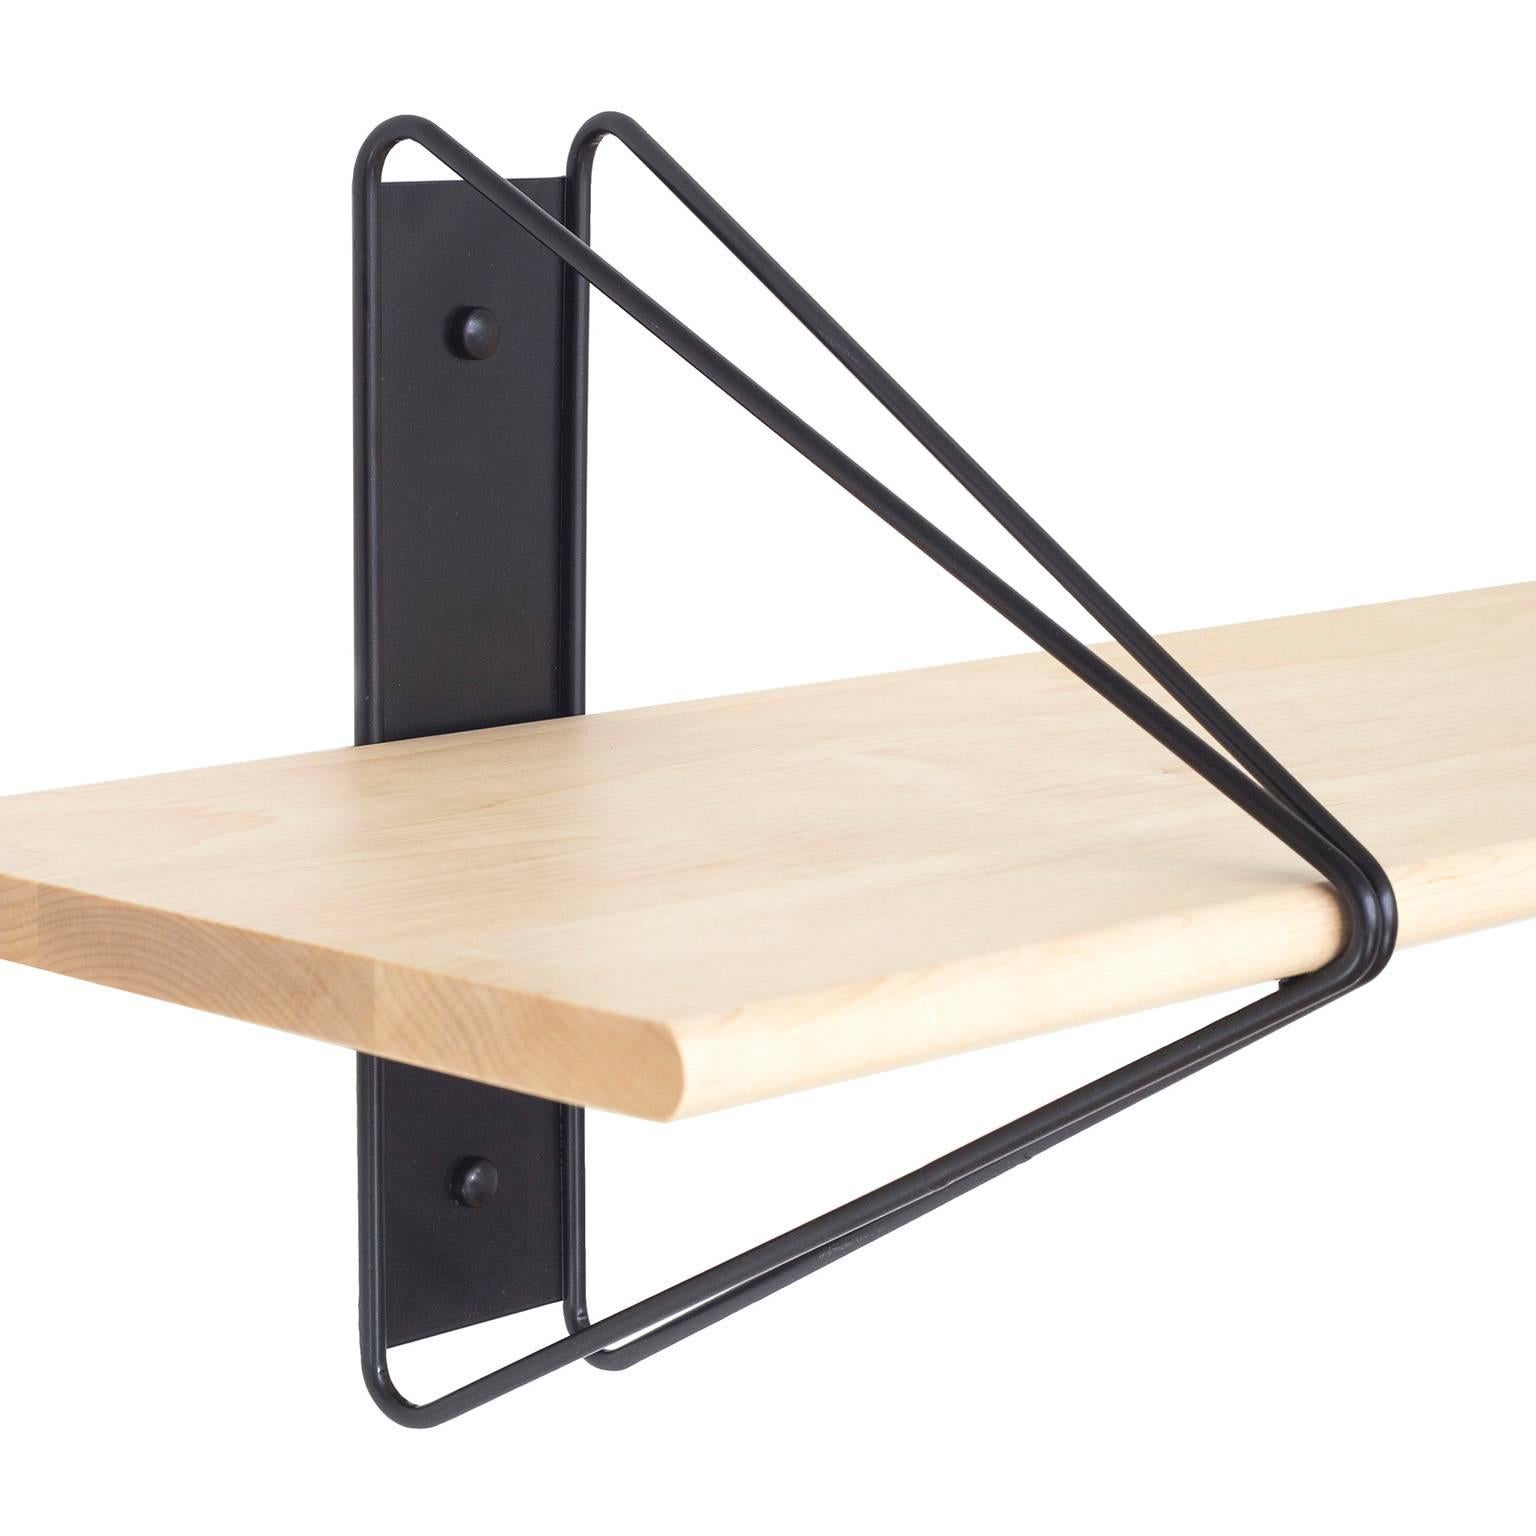 Modern Set of 5 Strut Shelves from Souda, Black and Maple, Made to Order For Sale